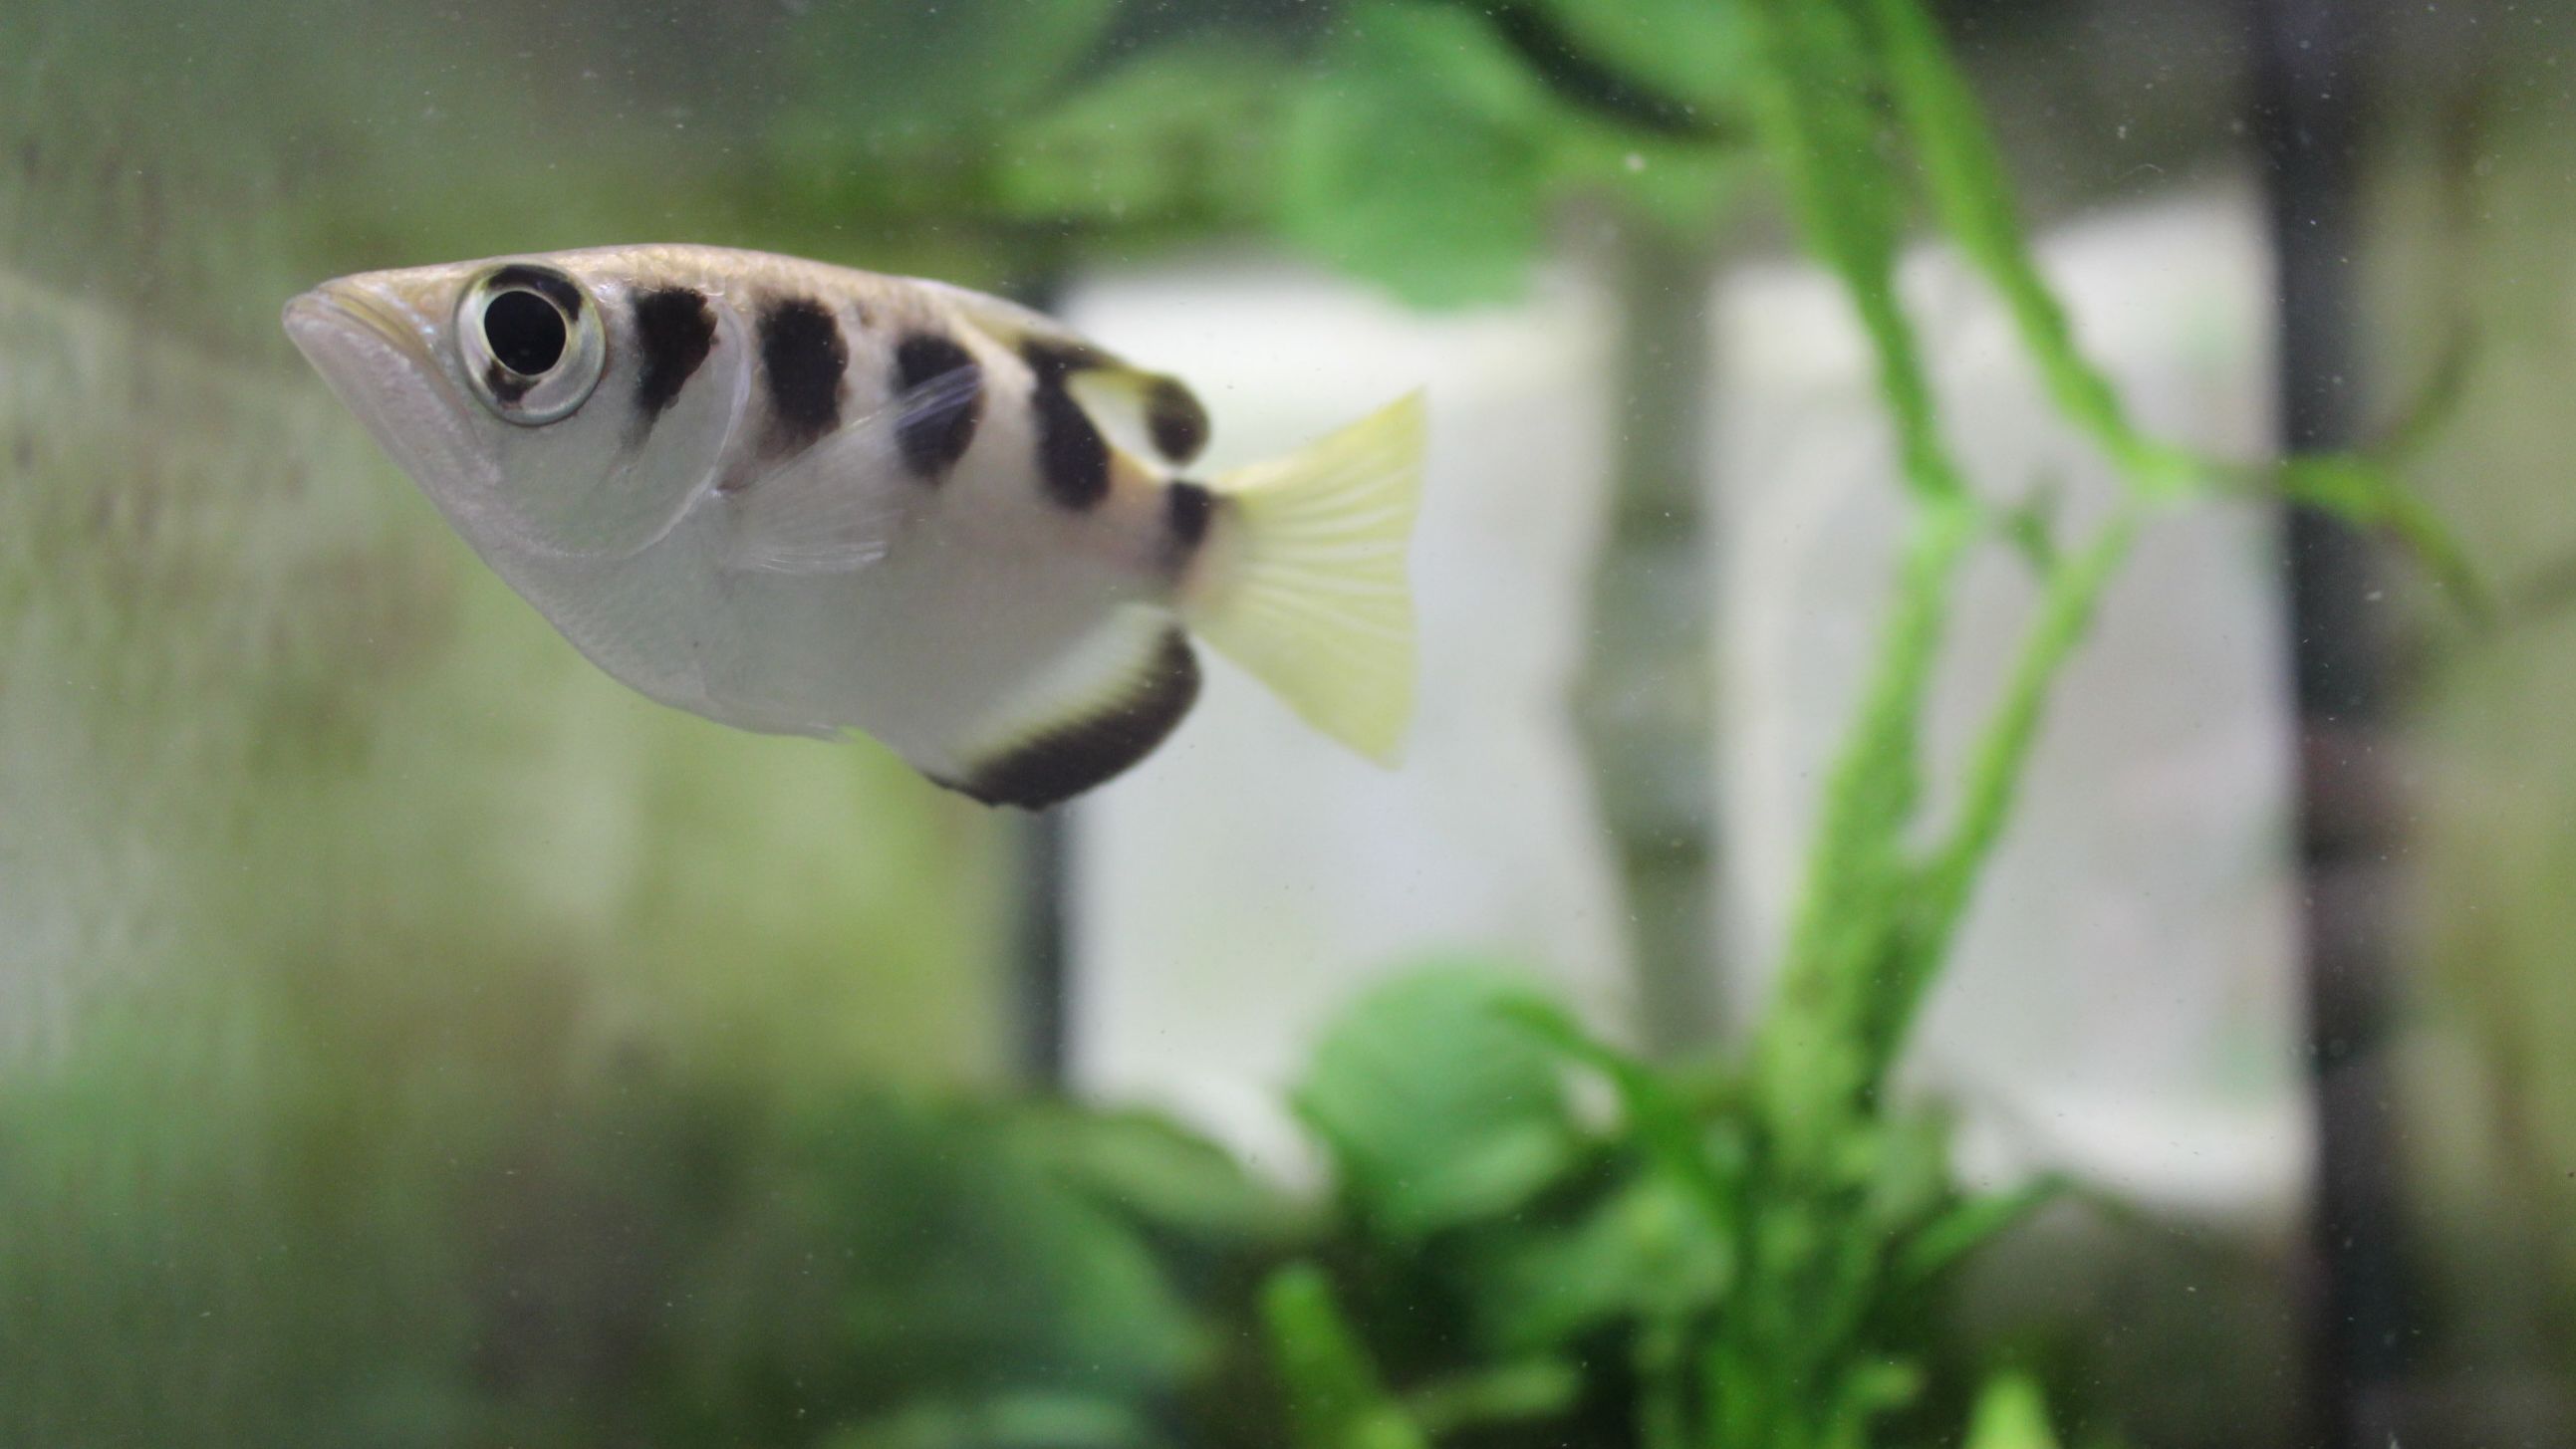 Oh hi, this archerfish is probably saying after seeing you